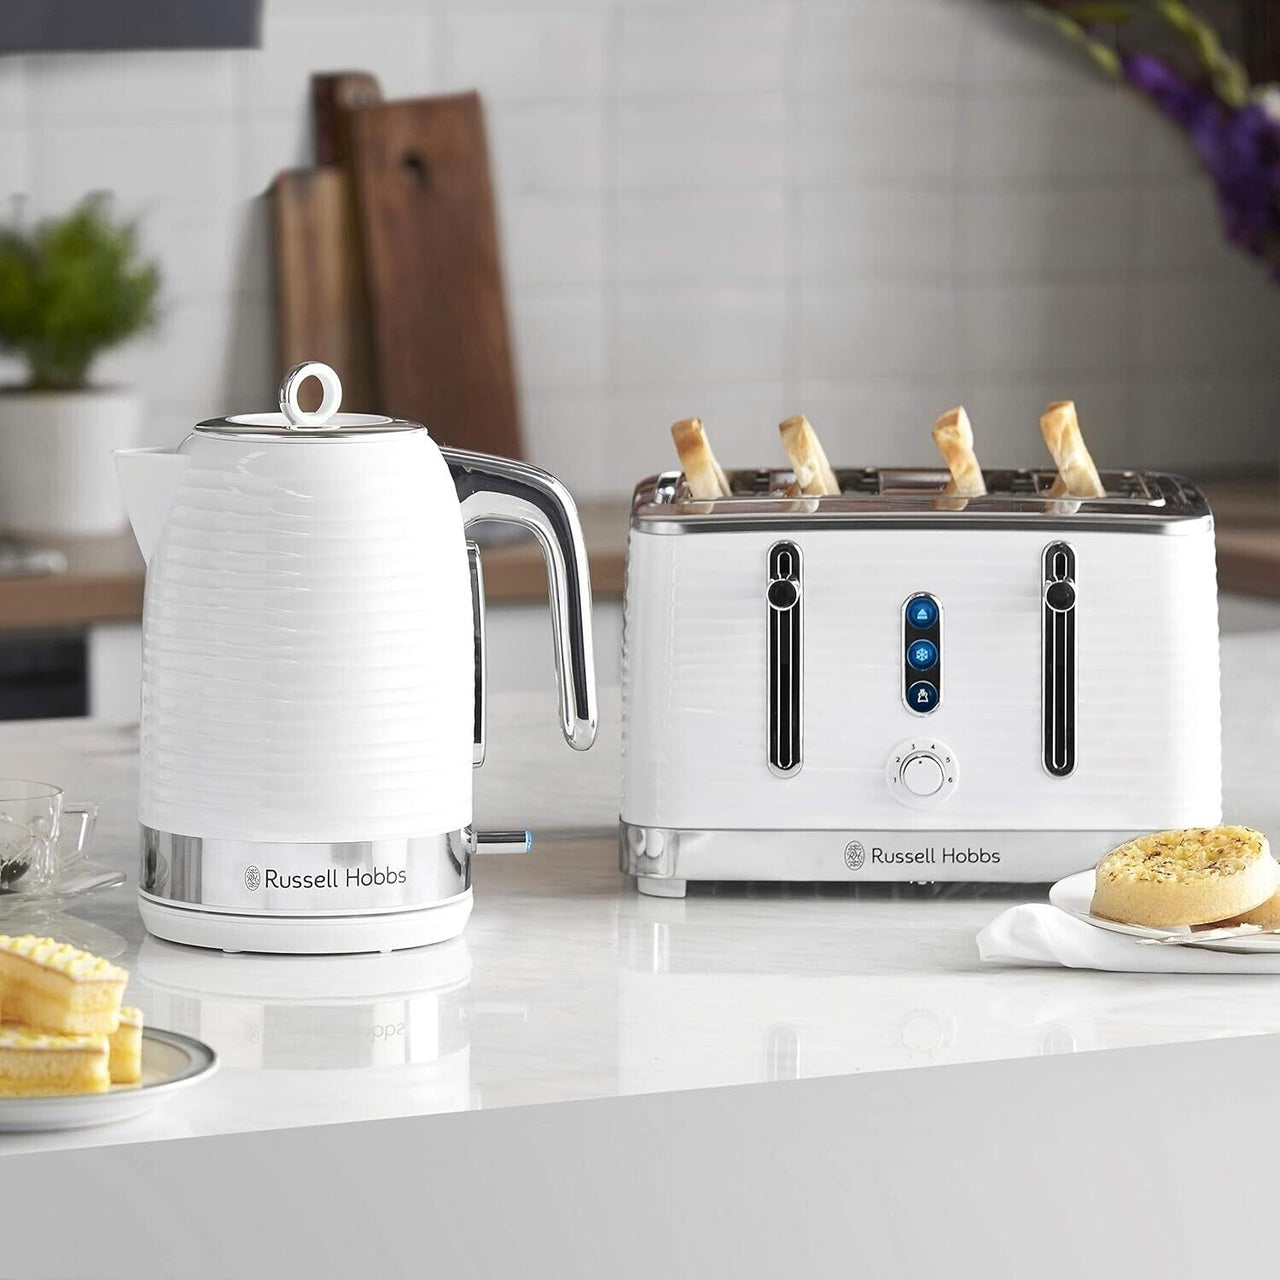 Russell Hobbs Inspire 1.7L Jug Kettle & 4 Slice Toaster Matching Set in White